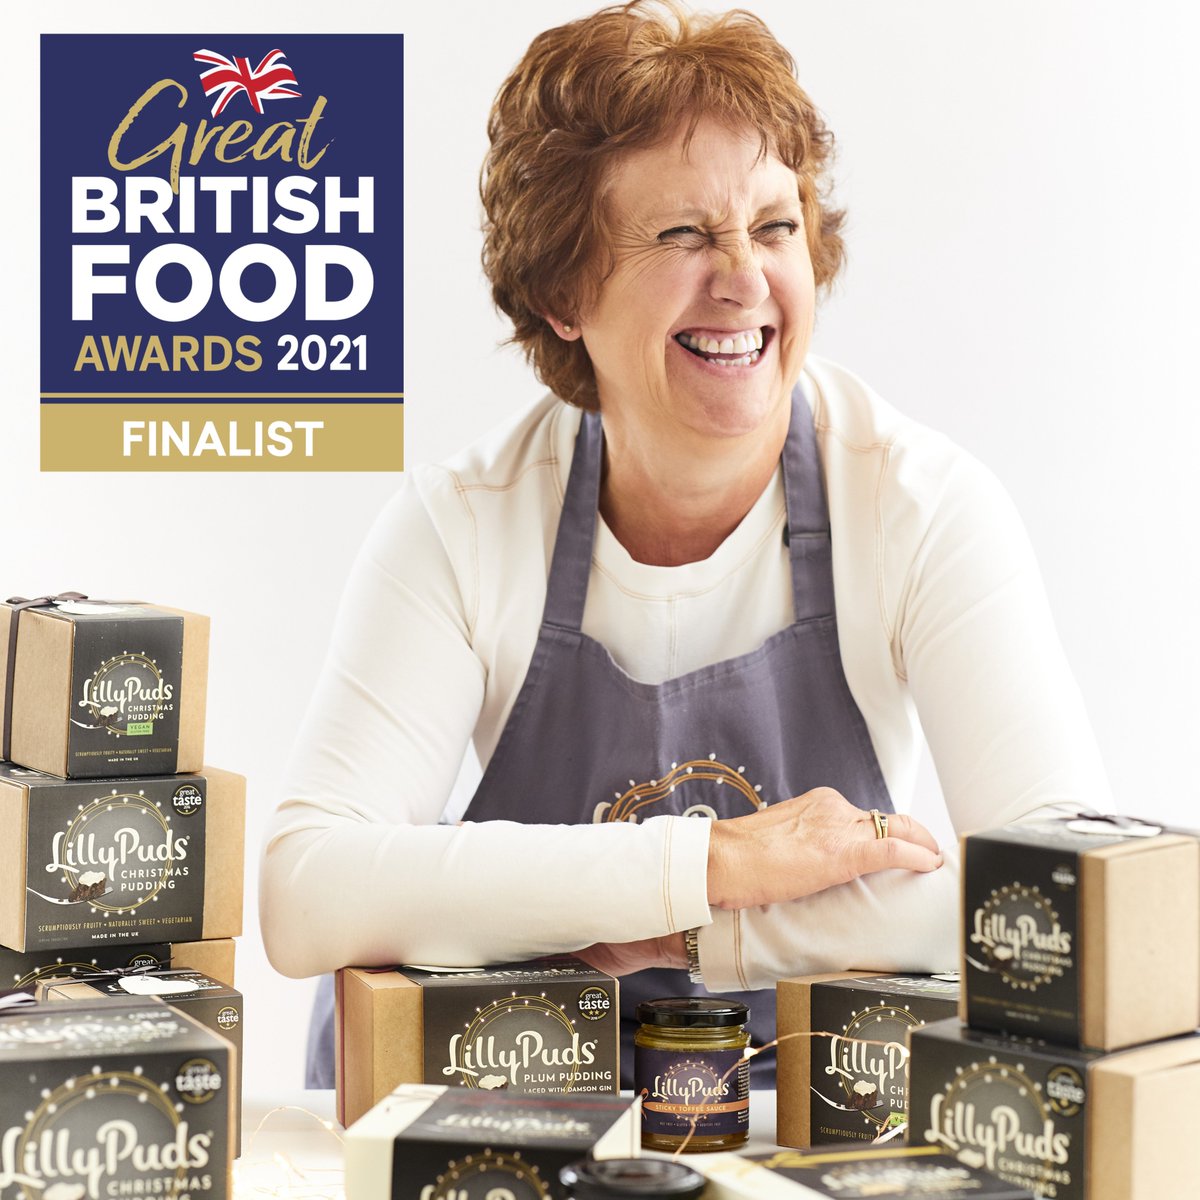 Oooh! Exciting news... We've been shortlisted with three of our pud's for the Great British Food Awards taking place in October! I'm feeling so proud of my Christmas Puddings right now 🥰 @gbf_mag #christmaspuddings #finalist #foodawards #britishbusiness #yay